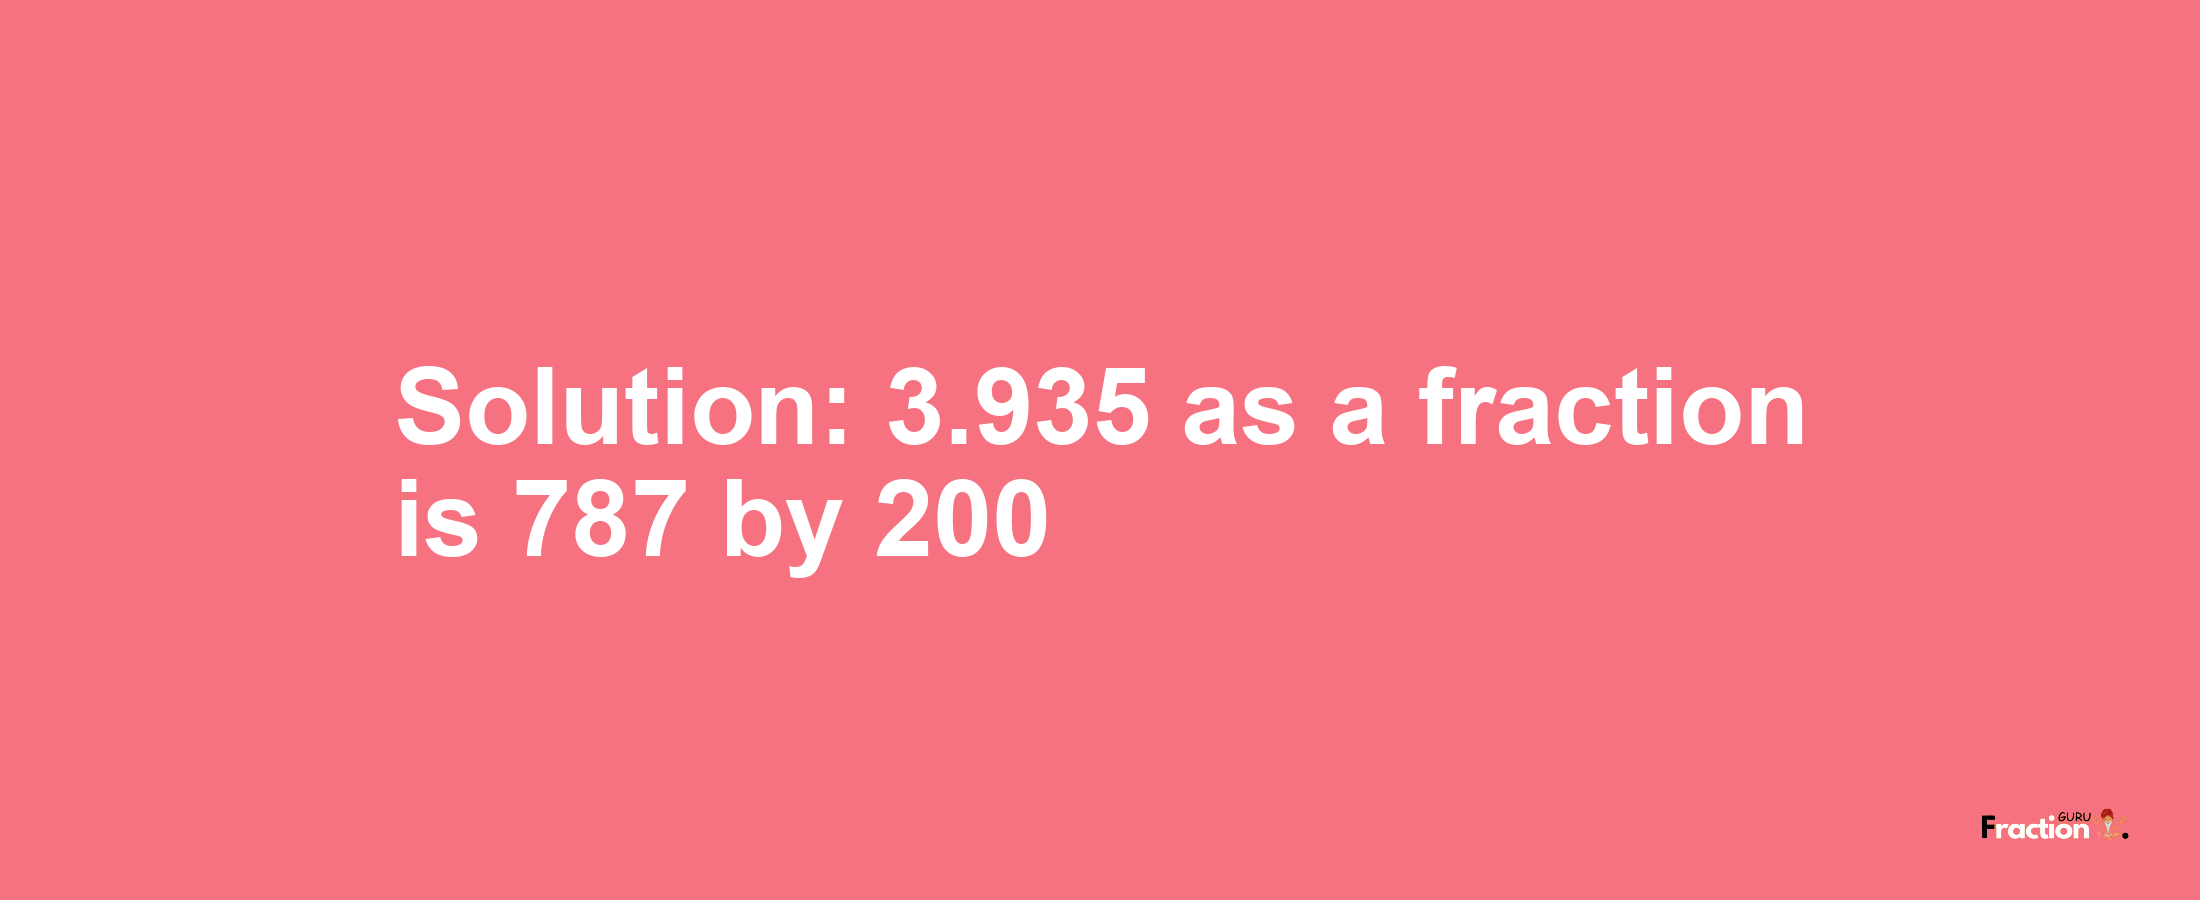 Solution:3.935 as a fraction is 787/200